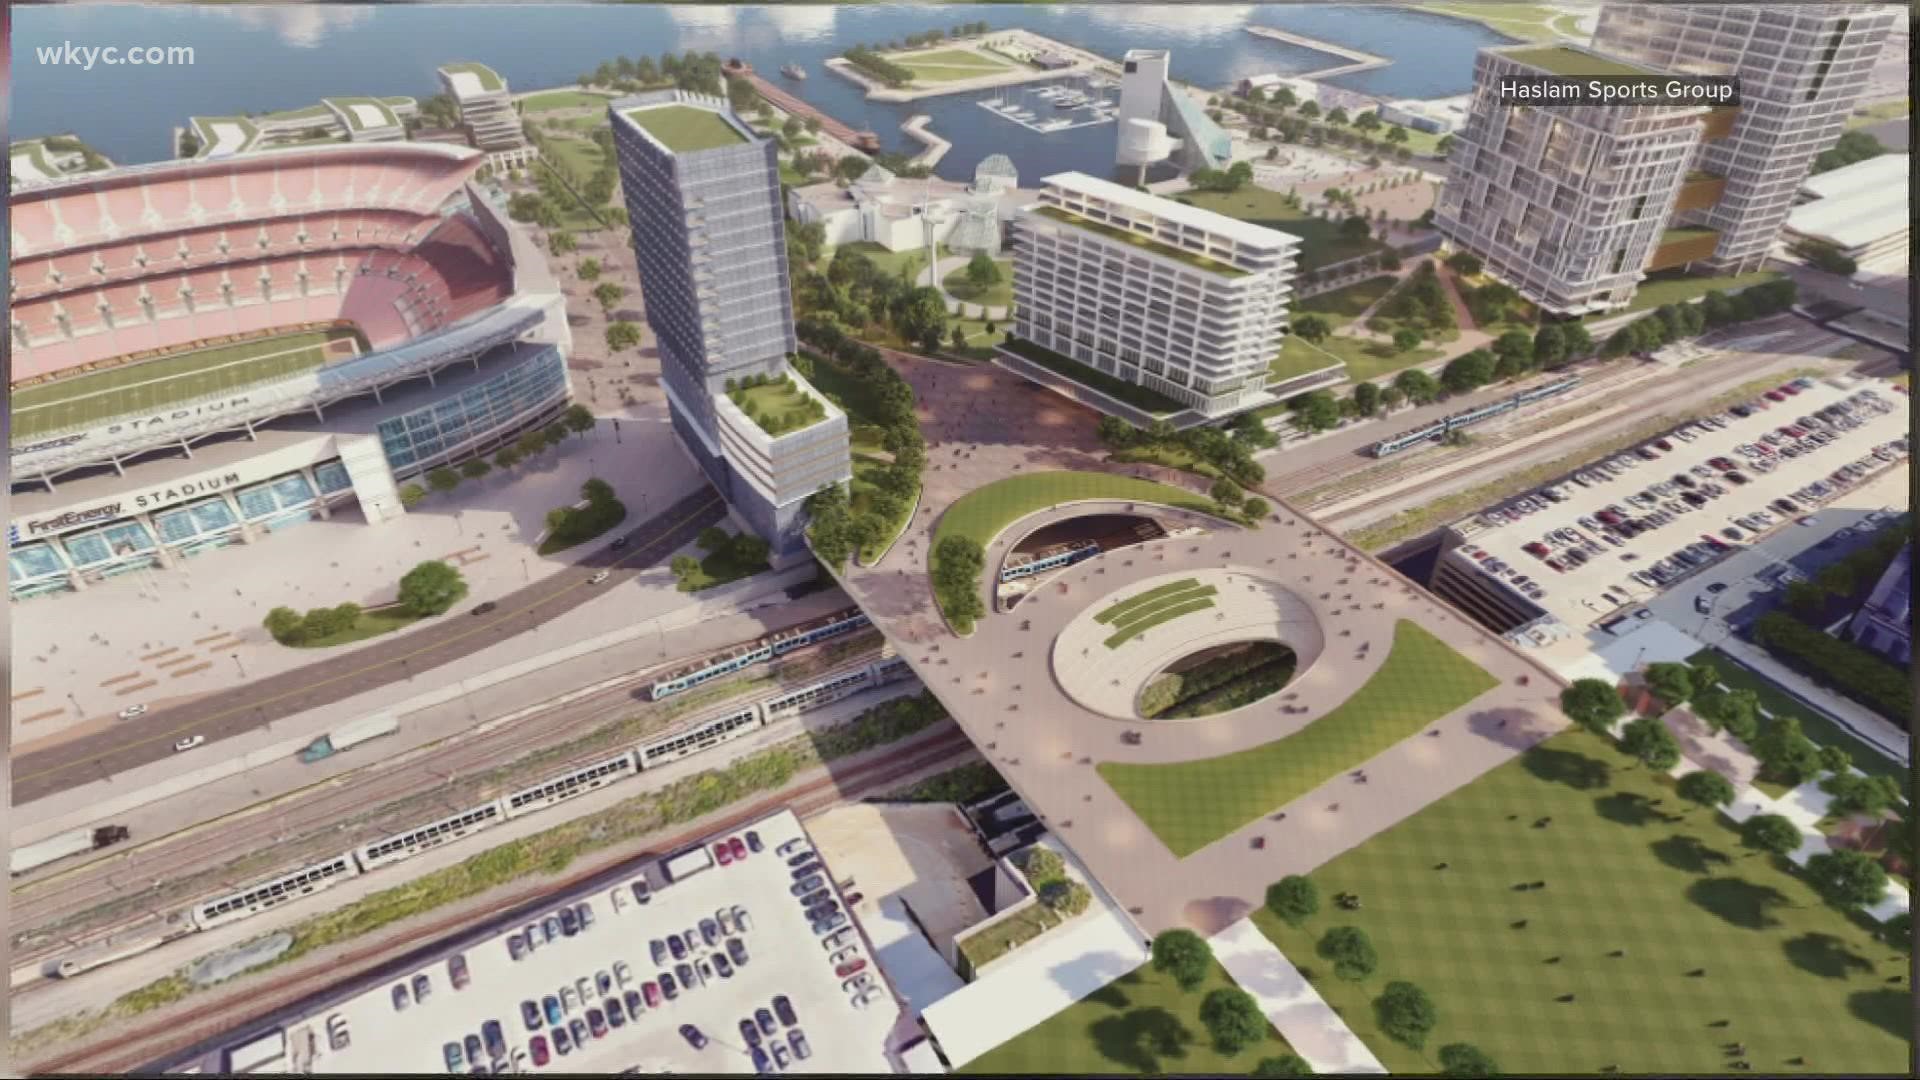 In May, the owners of the Cleveland Browns, the Haslam family, unveiled its vision for Cleveland's lakefront. City council has authorized $2.5 million to study.